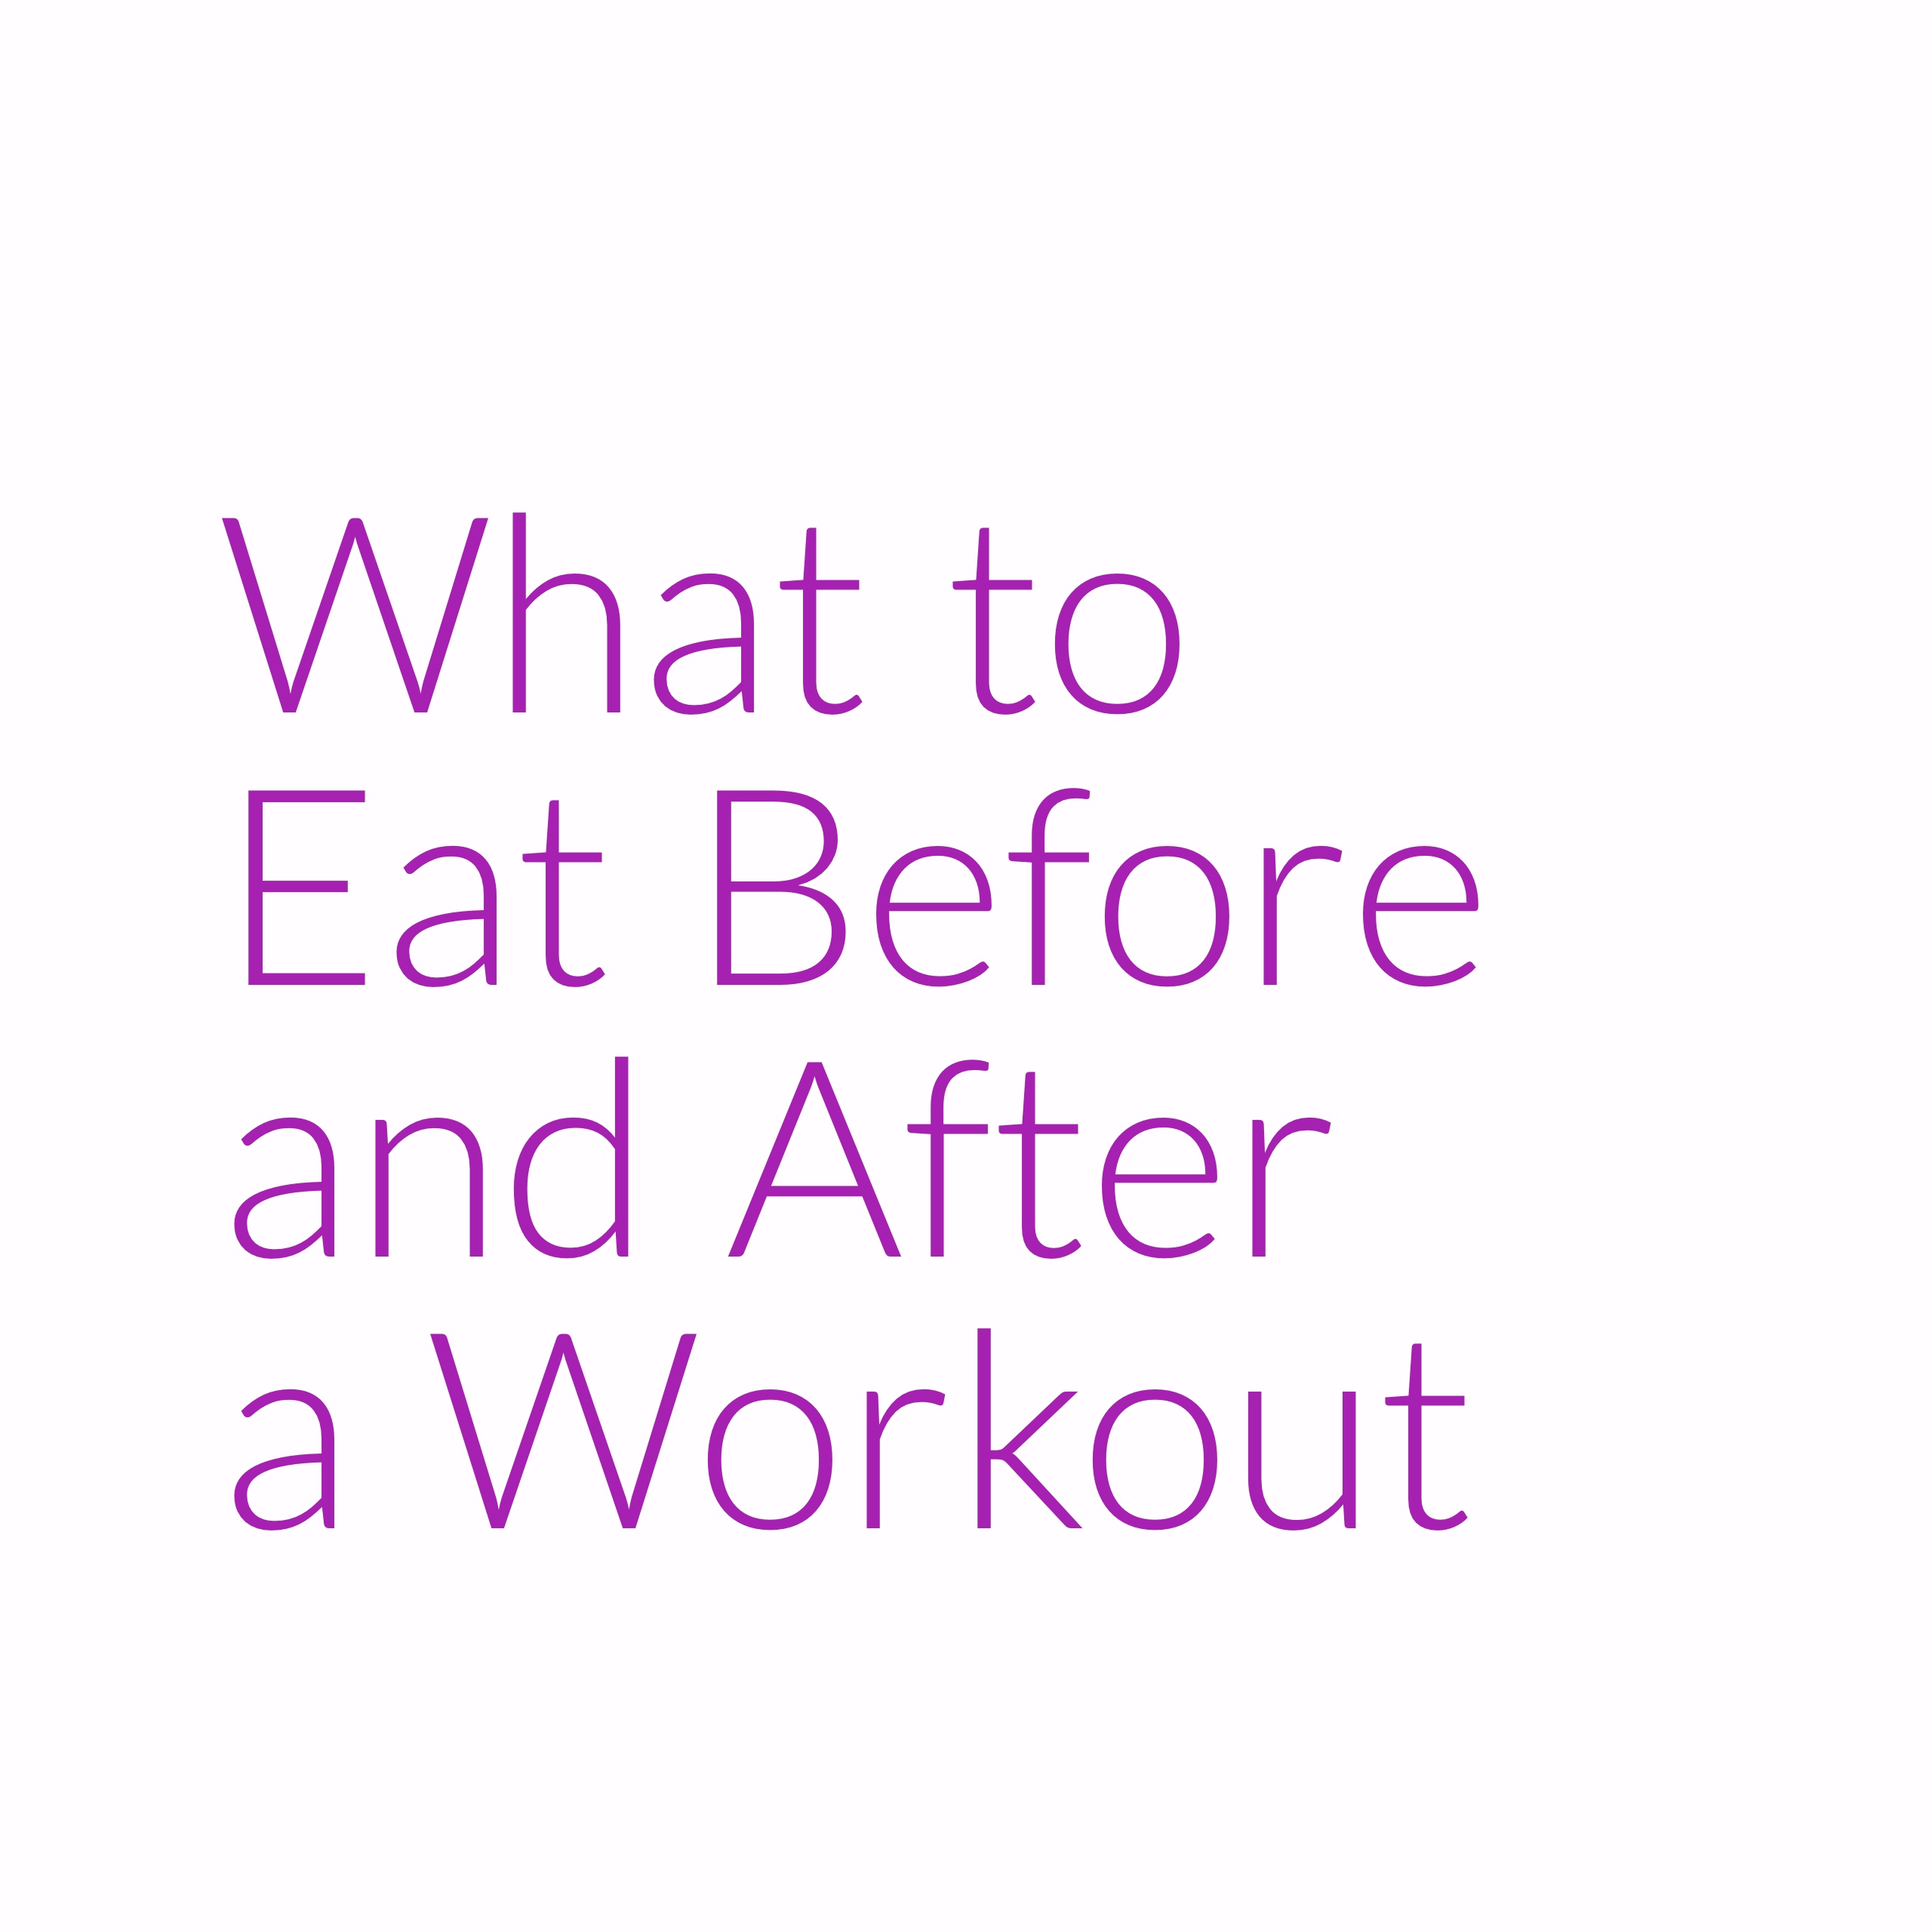 What to Eat Before After Workout